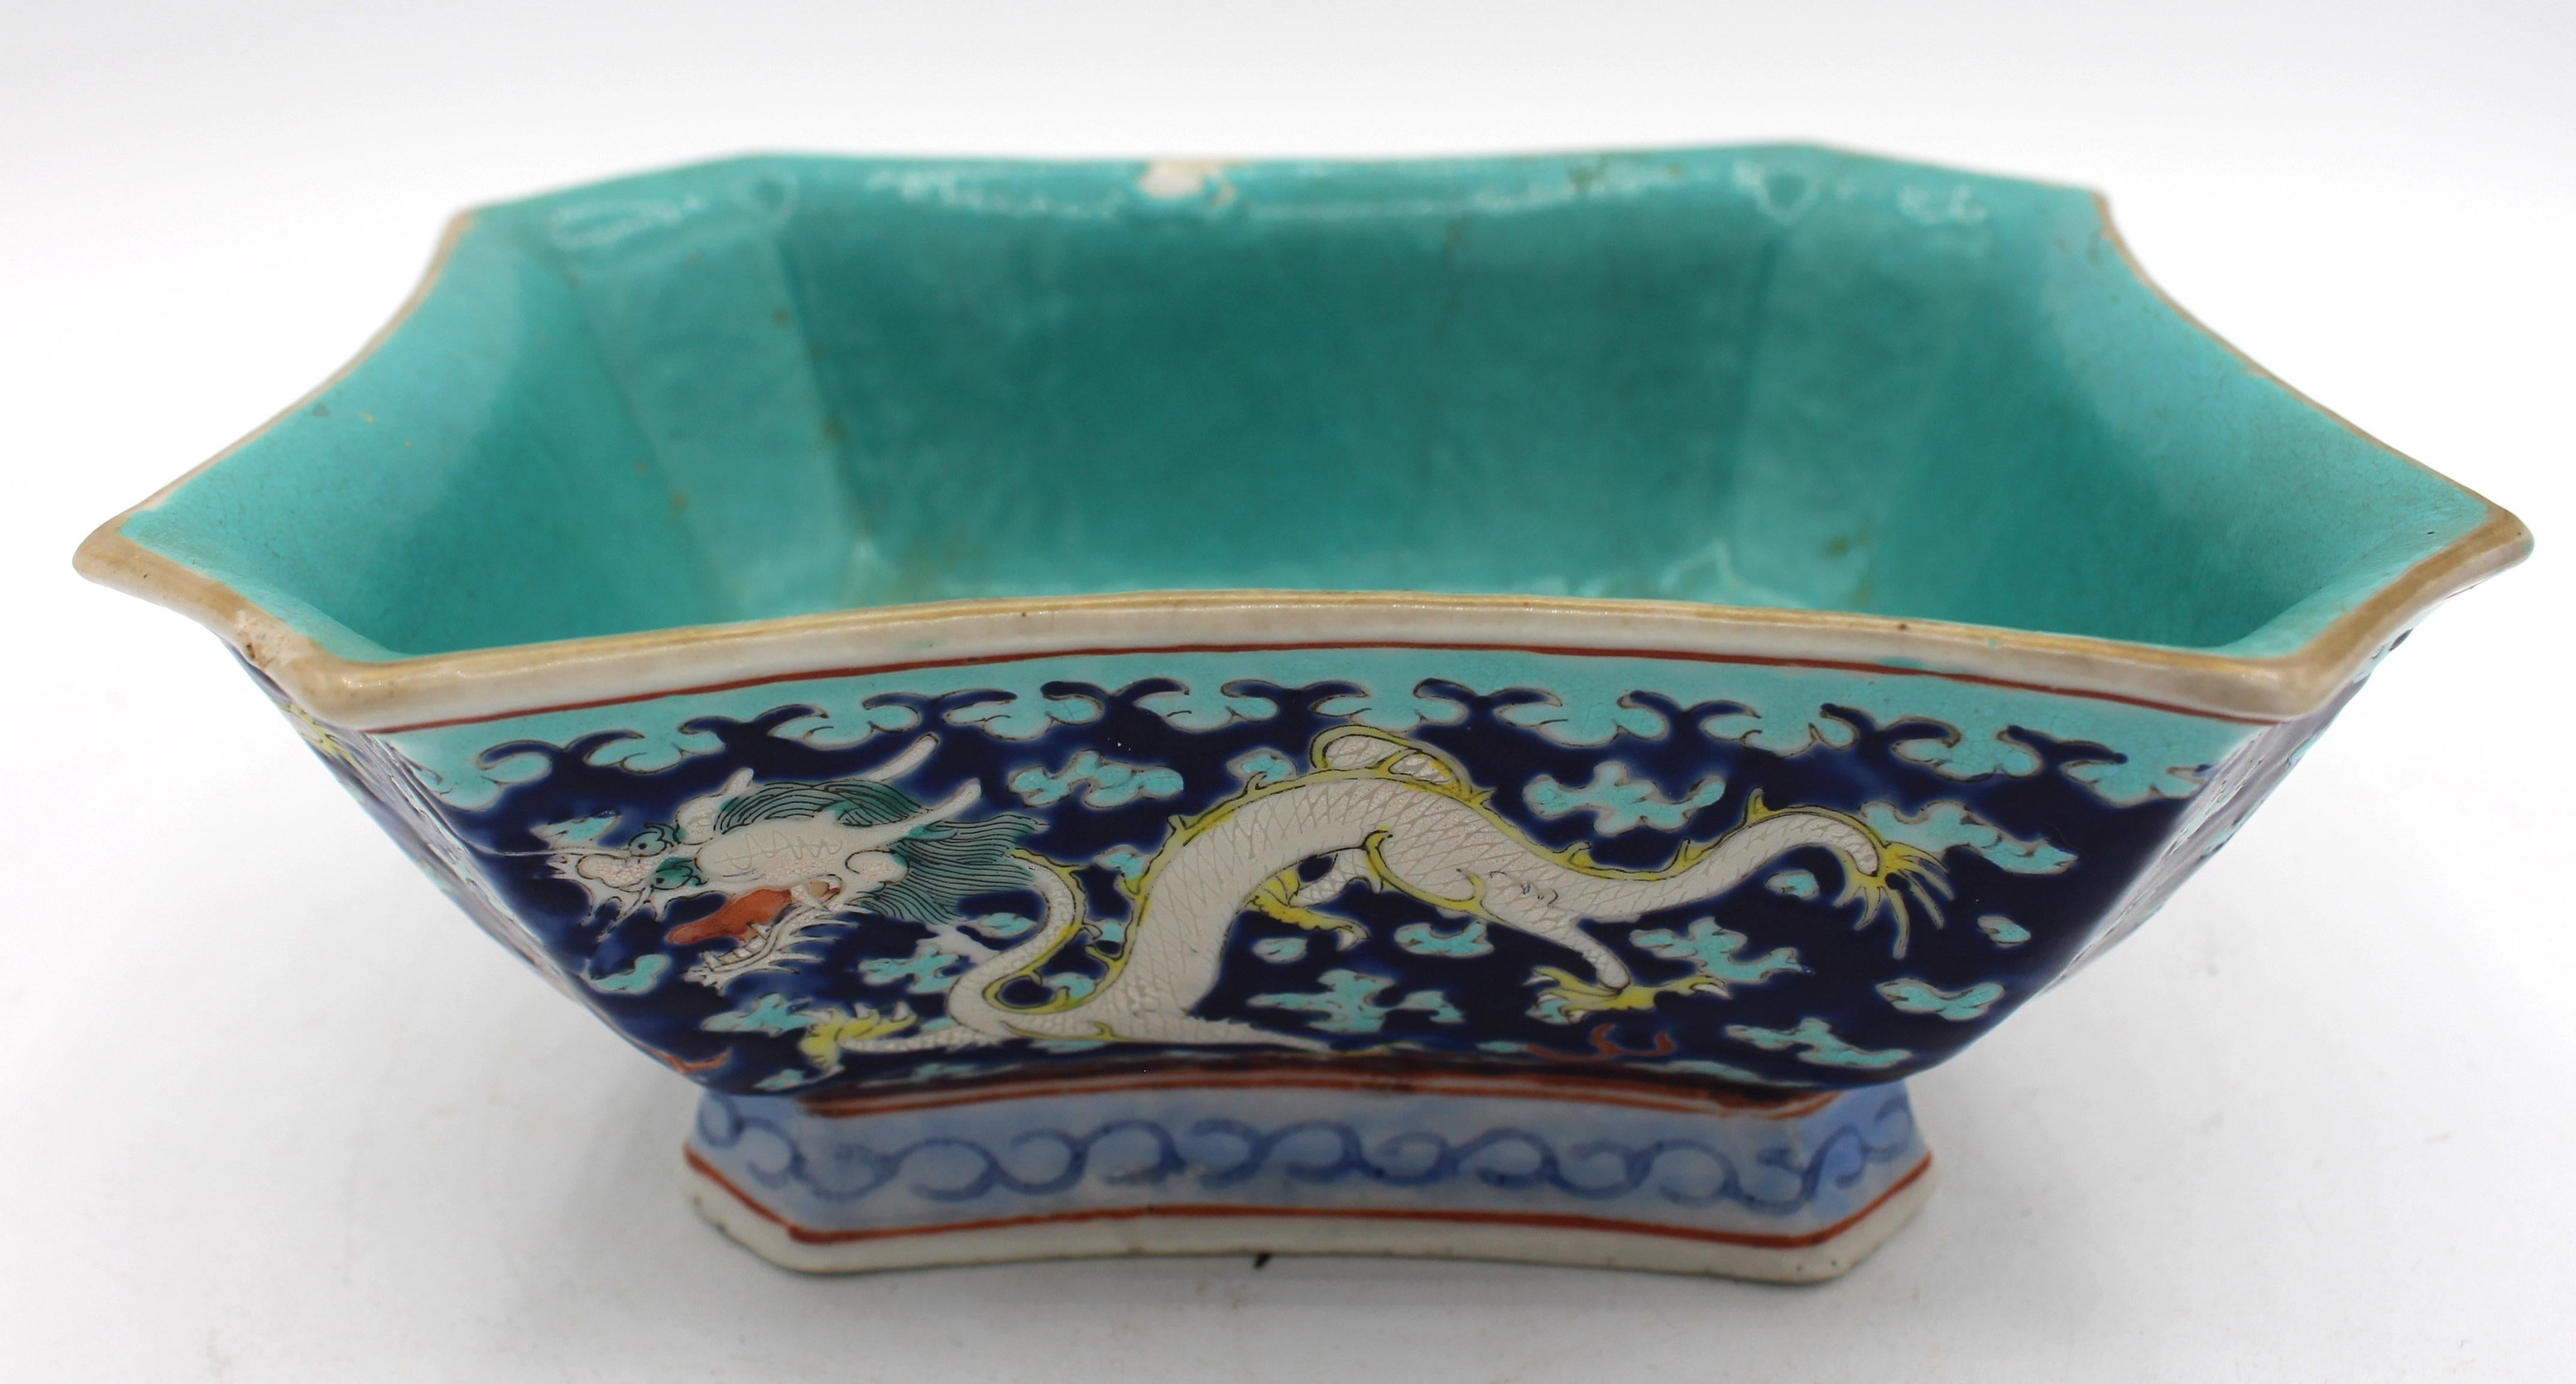 Enameled Late 19th-Early 20th Century Pair of Chinese Stacking Bowls For Sale